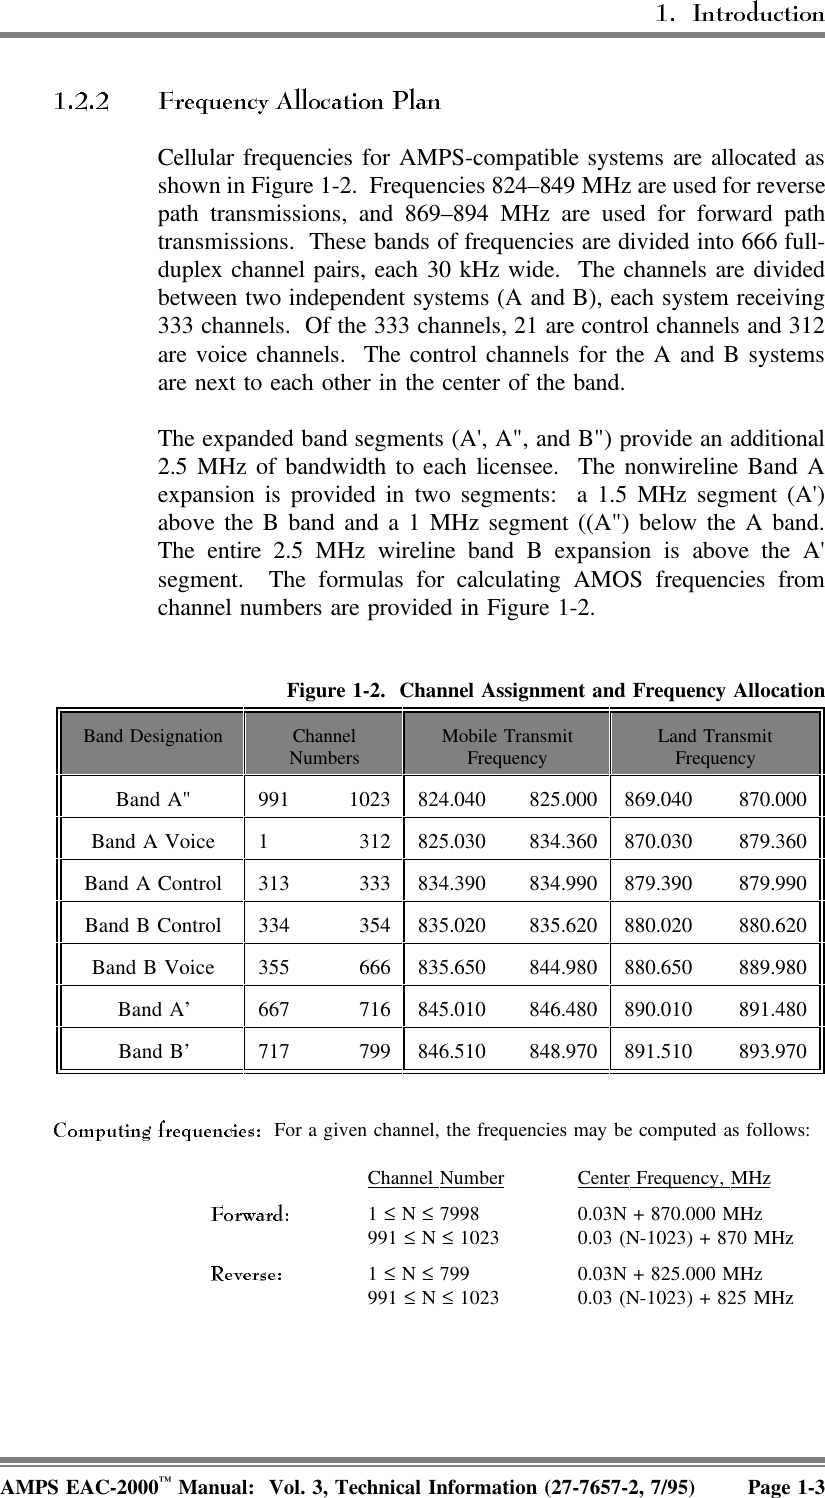 Cellular frequencies for AMPS-compatible systems are allocated asshown in Figure 1-2.  Frequencies 824–849 MHz are used for reversepath transmissions, and 869–894 MHz are used for forward pathtransmissions.  These bands of frequencies are divided into 666 full-duplex channel pairs, each 30 kHz wide.  The channels are dividedbetween two independent systems (A and B), each system receiving333 channels.  Of the 333 channels, 21 are control channels and 312are voice channels.  The control channels for the A and B systemsare next to each other in the center of the band.The expanded band segments (A&apos;, A&quot;, and B&quot;) provide an additional2.5 MHz of bandwidth to each licensee.  The nonwireline Band Aexpansion is provided in two segments:  a 1.5 MHz segment (A&apos;)above the B band and a 1 MHz segment ((A&quot;) below the A band.The entire 2.5 MHz wireline band B expansion is above the A&apos;segment.  The formulas for calculating AMOS frequencies fromchannel numbers are provided in Figure 1-2. Figure 1-2.  Channel Assignment and Frequency AllocationBand Designation ChannelNumbers Mobile TransmitFrequency Land TransmitFrequencyBand A&quot; 991 1023 824.040 825.000 869.040 870.000Band A Voice 1 312 825.030 834.360 870.030 879.360Band A Control 313 333 834.390 834.990 879.390 879.990Band B Control 334 354 835.020 835.620 880.020 880.620Band B Voice 355 666 835.650 844.980 880.650 889.980Band A’ 667 716 845.010 846.480 890.010 891.480Band B’ 717 799 846.510 848.970 891.510 893.970  For a given channel, the frequencies may be computed as follows:Channel  Number Center  Frequency,  MHz1 ≤ N ≤ 7998 0.03N + 870.000 MHz991 ≤ N ≤ 1023 0.03 (N-1023) + 870 MHz1 ≤ N ≤ 799 0.03N + 825.000 MHz991 ≤ N ≤ 1023 0.03 (N-1023) + 825 MHzAMPS EAC-2000™ Manual:  Vol. 3, Technical Information (27-7657-2, 7/95) Page 1-3